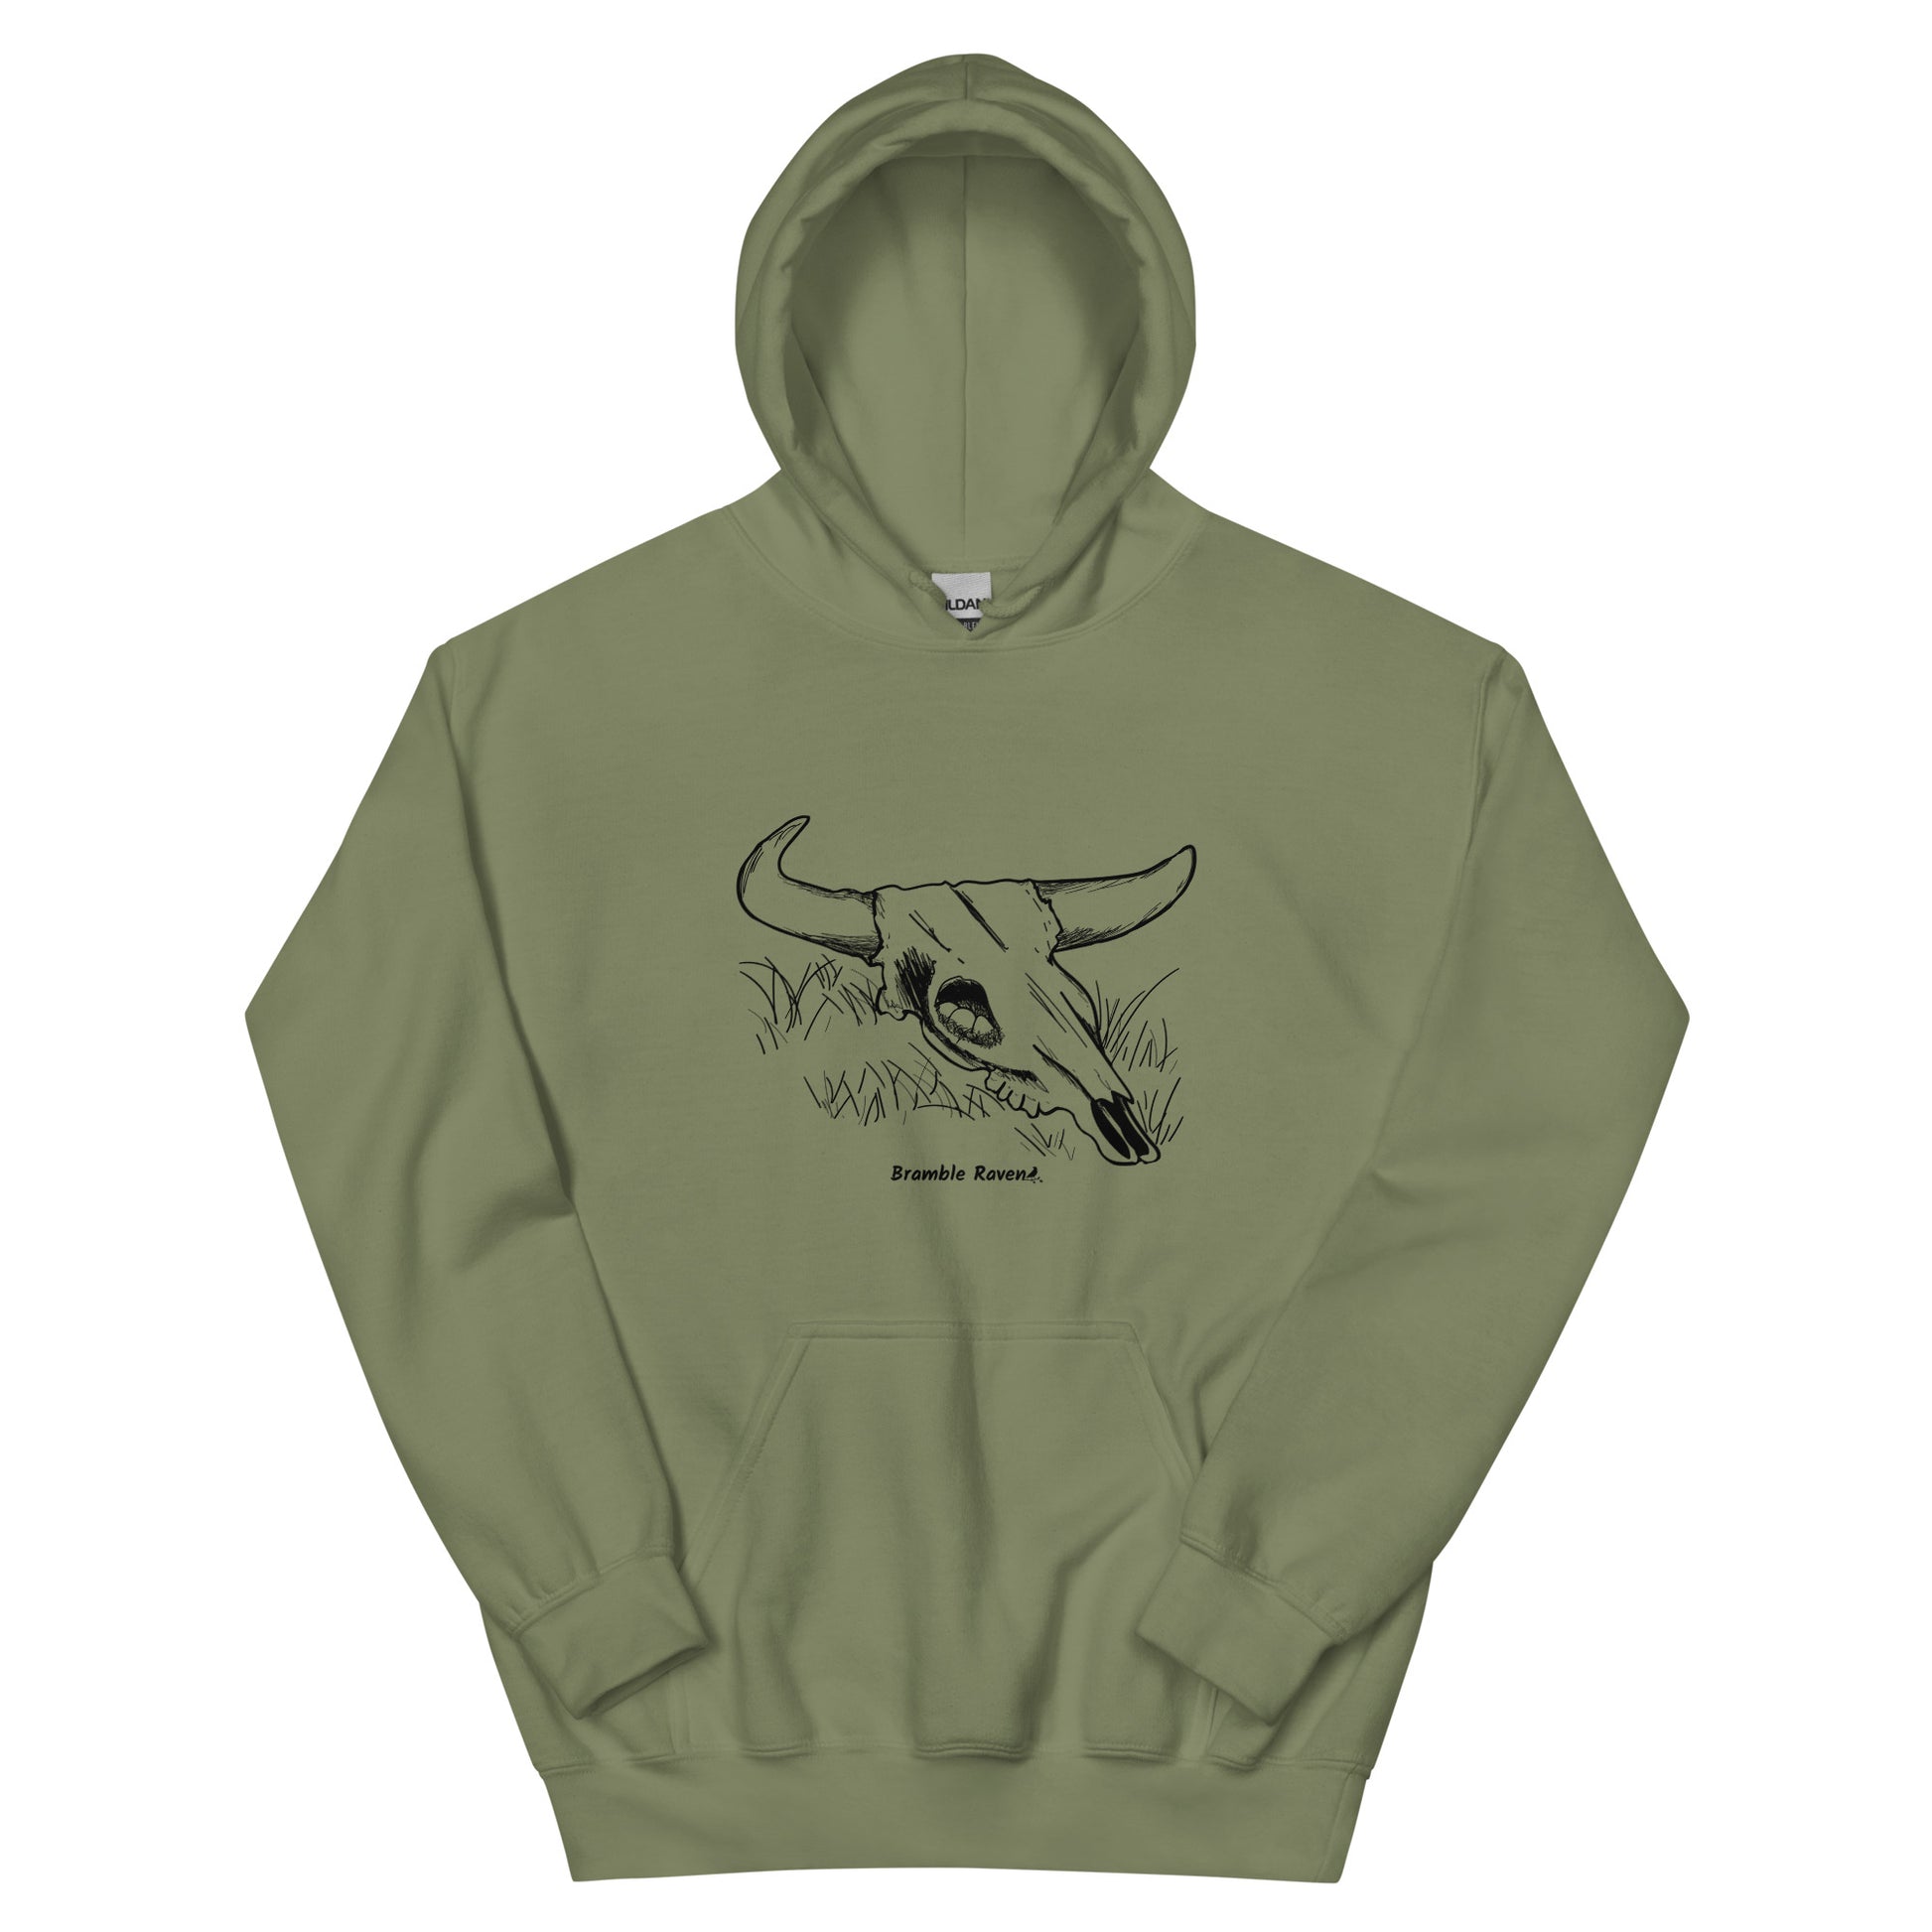 Military green colored unisex hoodie. Front has image of a cow skull cradling a bird nest. Features double-lined hood and front pouch pocket.